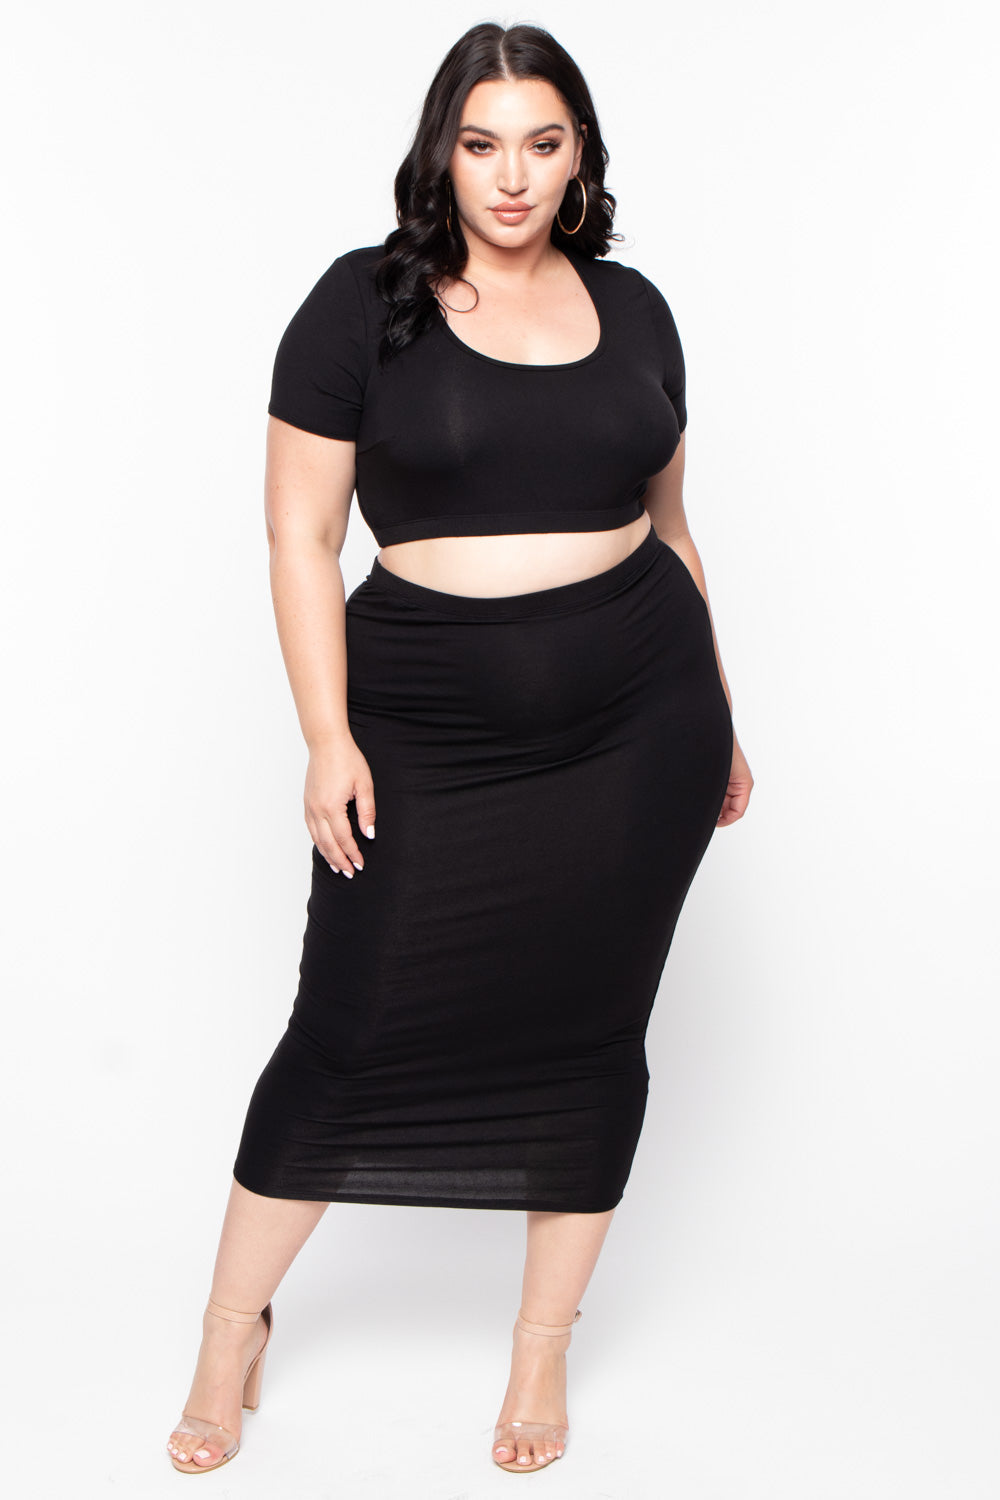 MRSFITOK Plus Size Women 2 Piece Outfits Sets Sexy Tracksuit Midi Dress,Sleeveless  Tank Top Bodycon Skirts Set Casual Summer Black L at  Women's Clothing  store